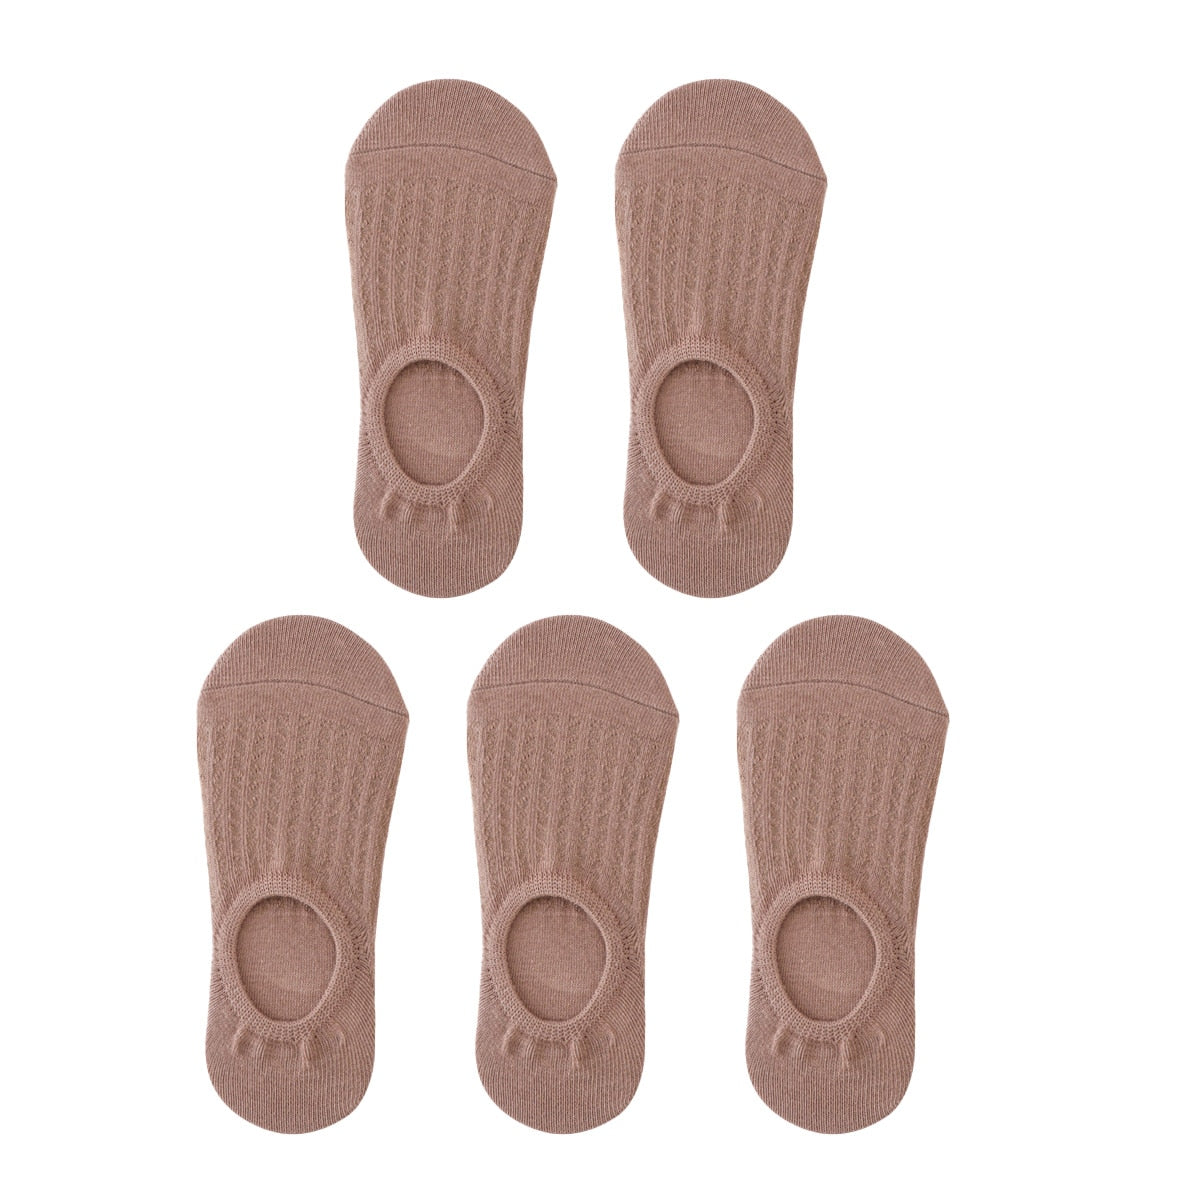 5pair Women Invisible Boat Socks Summer Mujer Silicone Non-slip Chaussette Ankle Low Female Cotton Show Breathable Calcetines